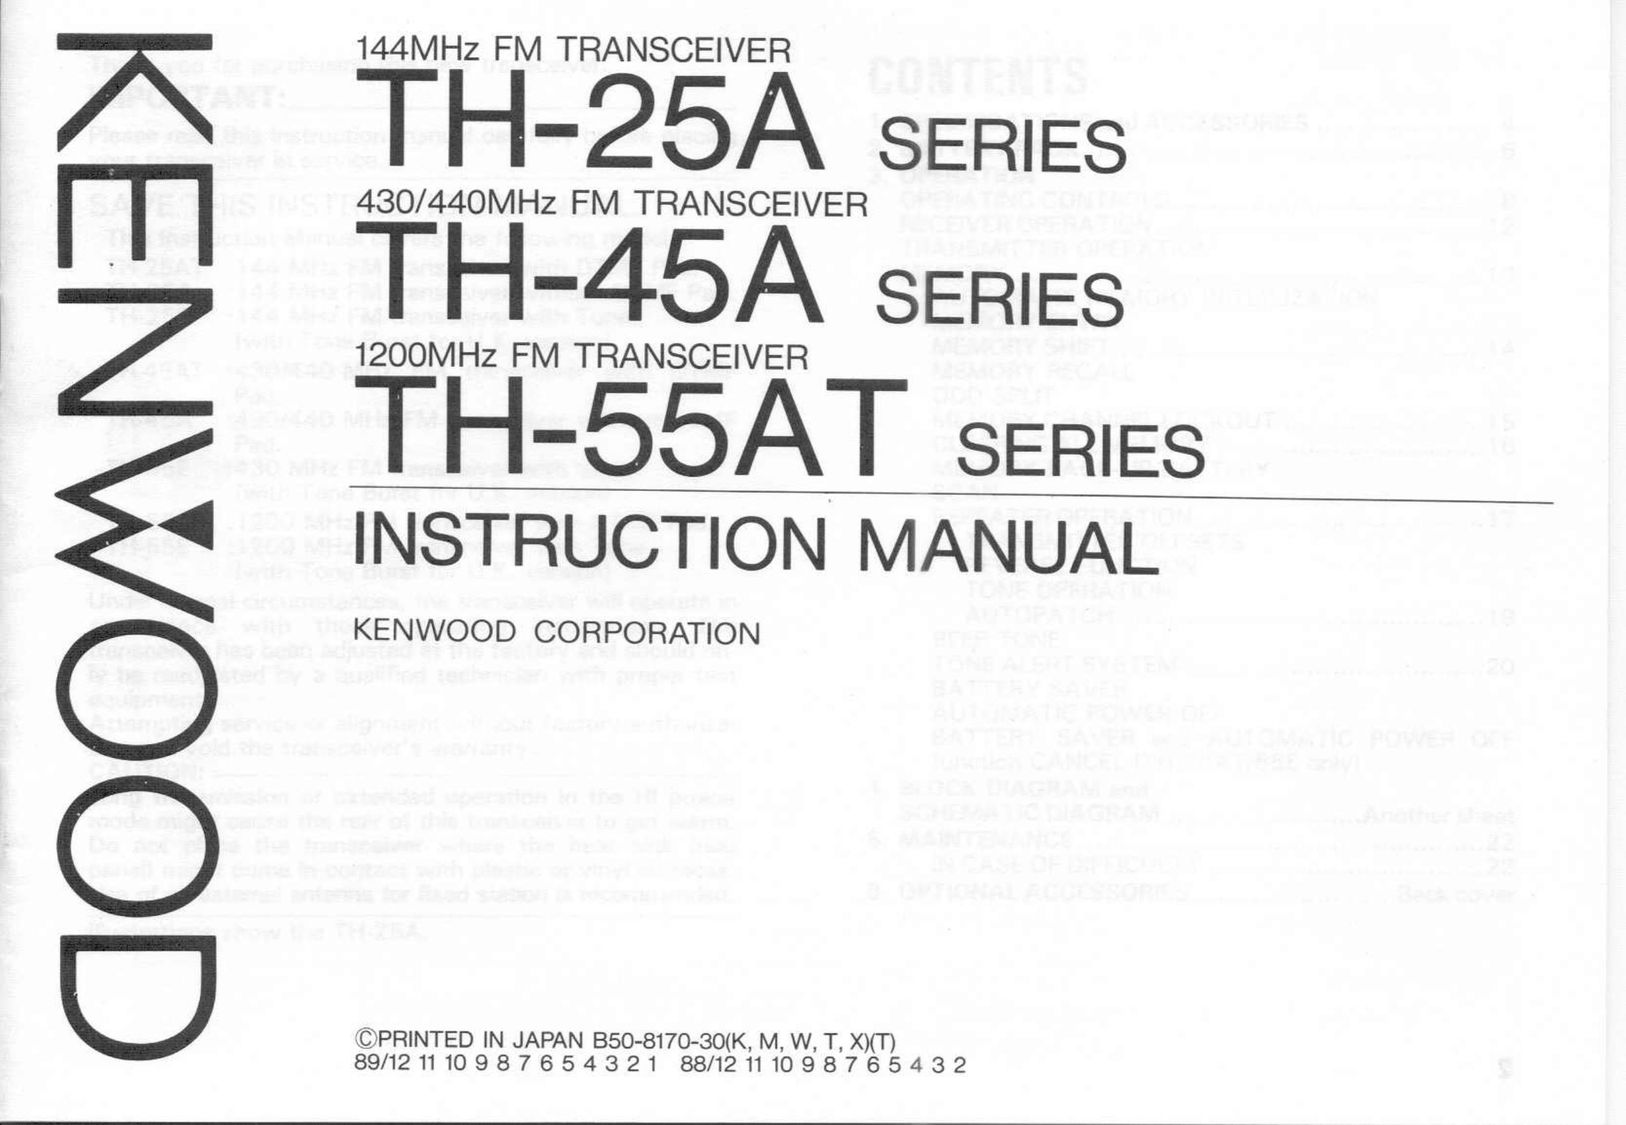 Kenwood TH-55AT Home Security System User Manual